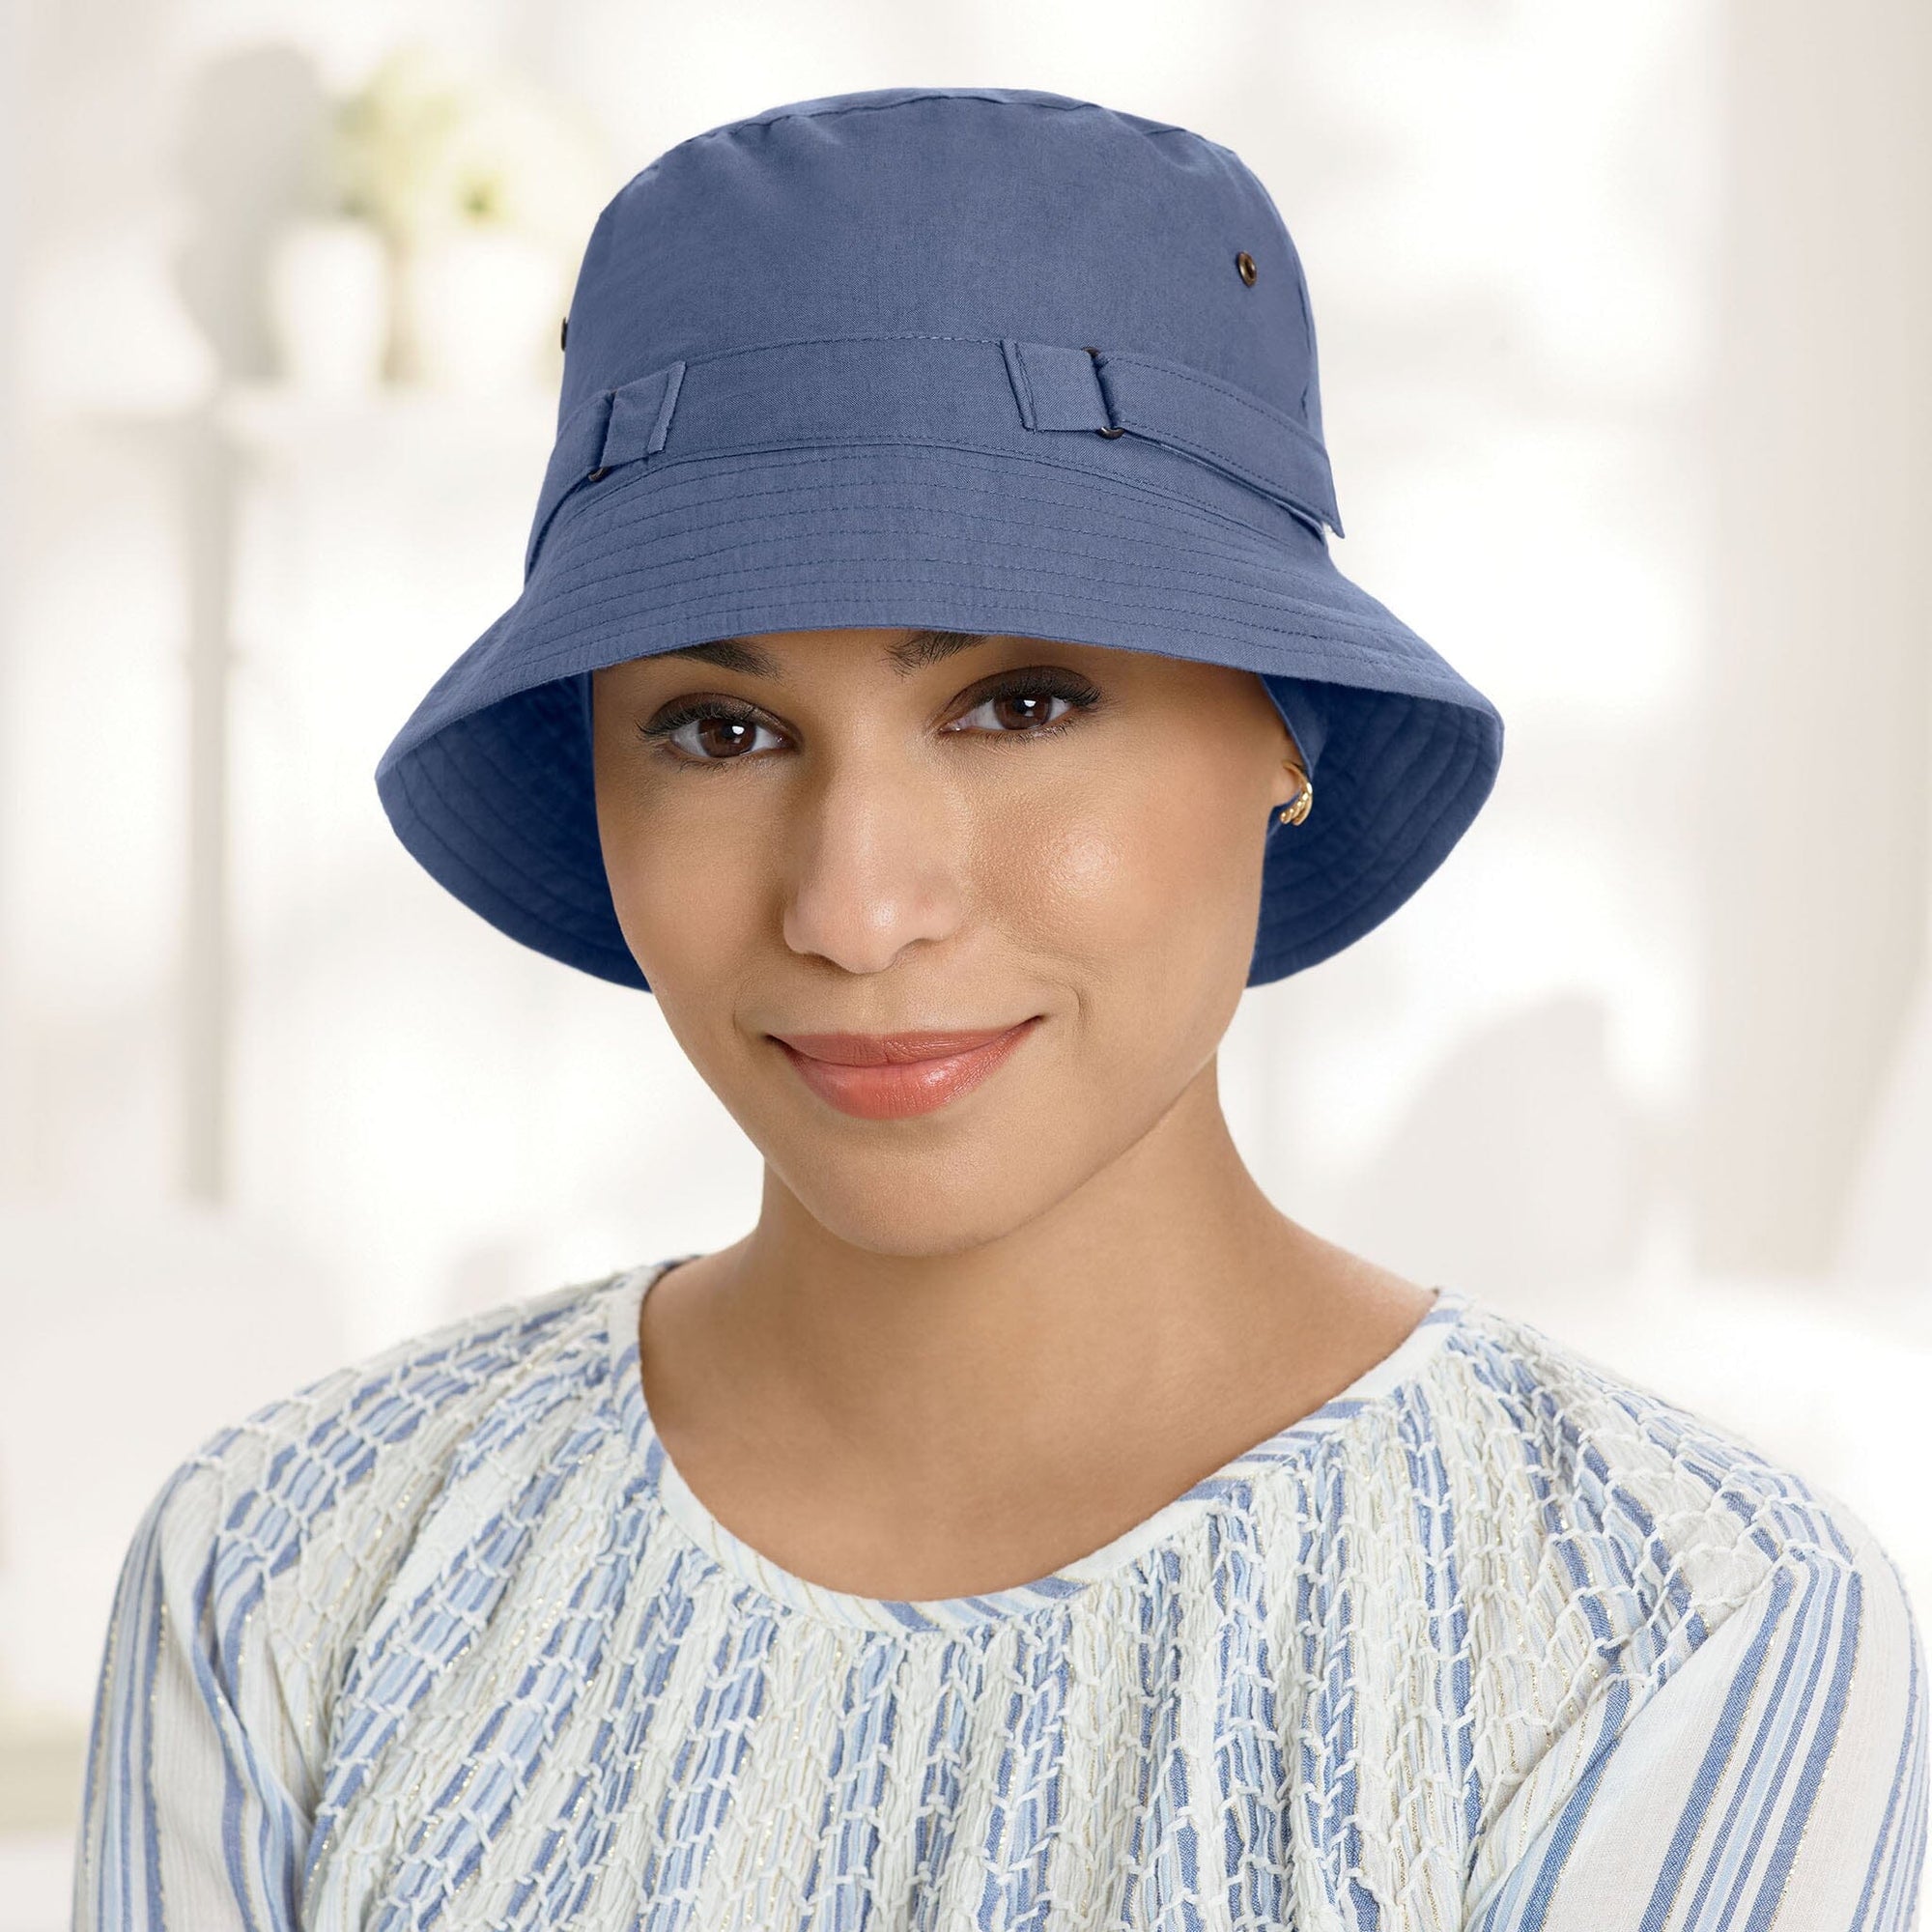 Shown in Denim with Stretchy 3” Wide Bamboo Knit Headband (#9267), in Denim